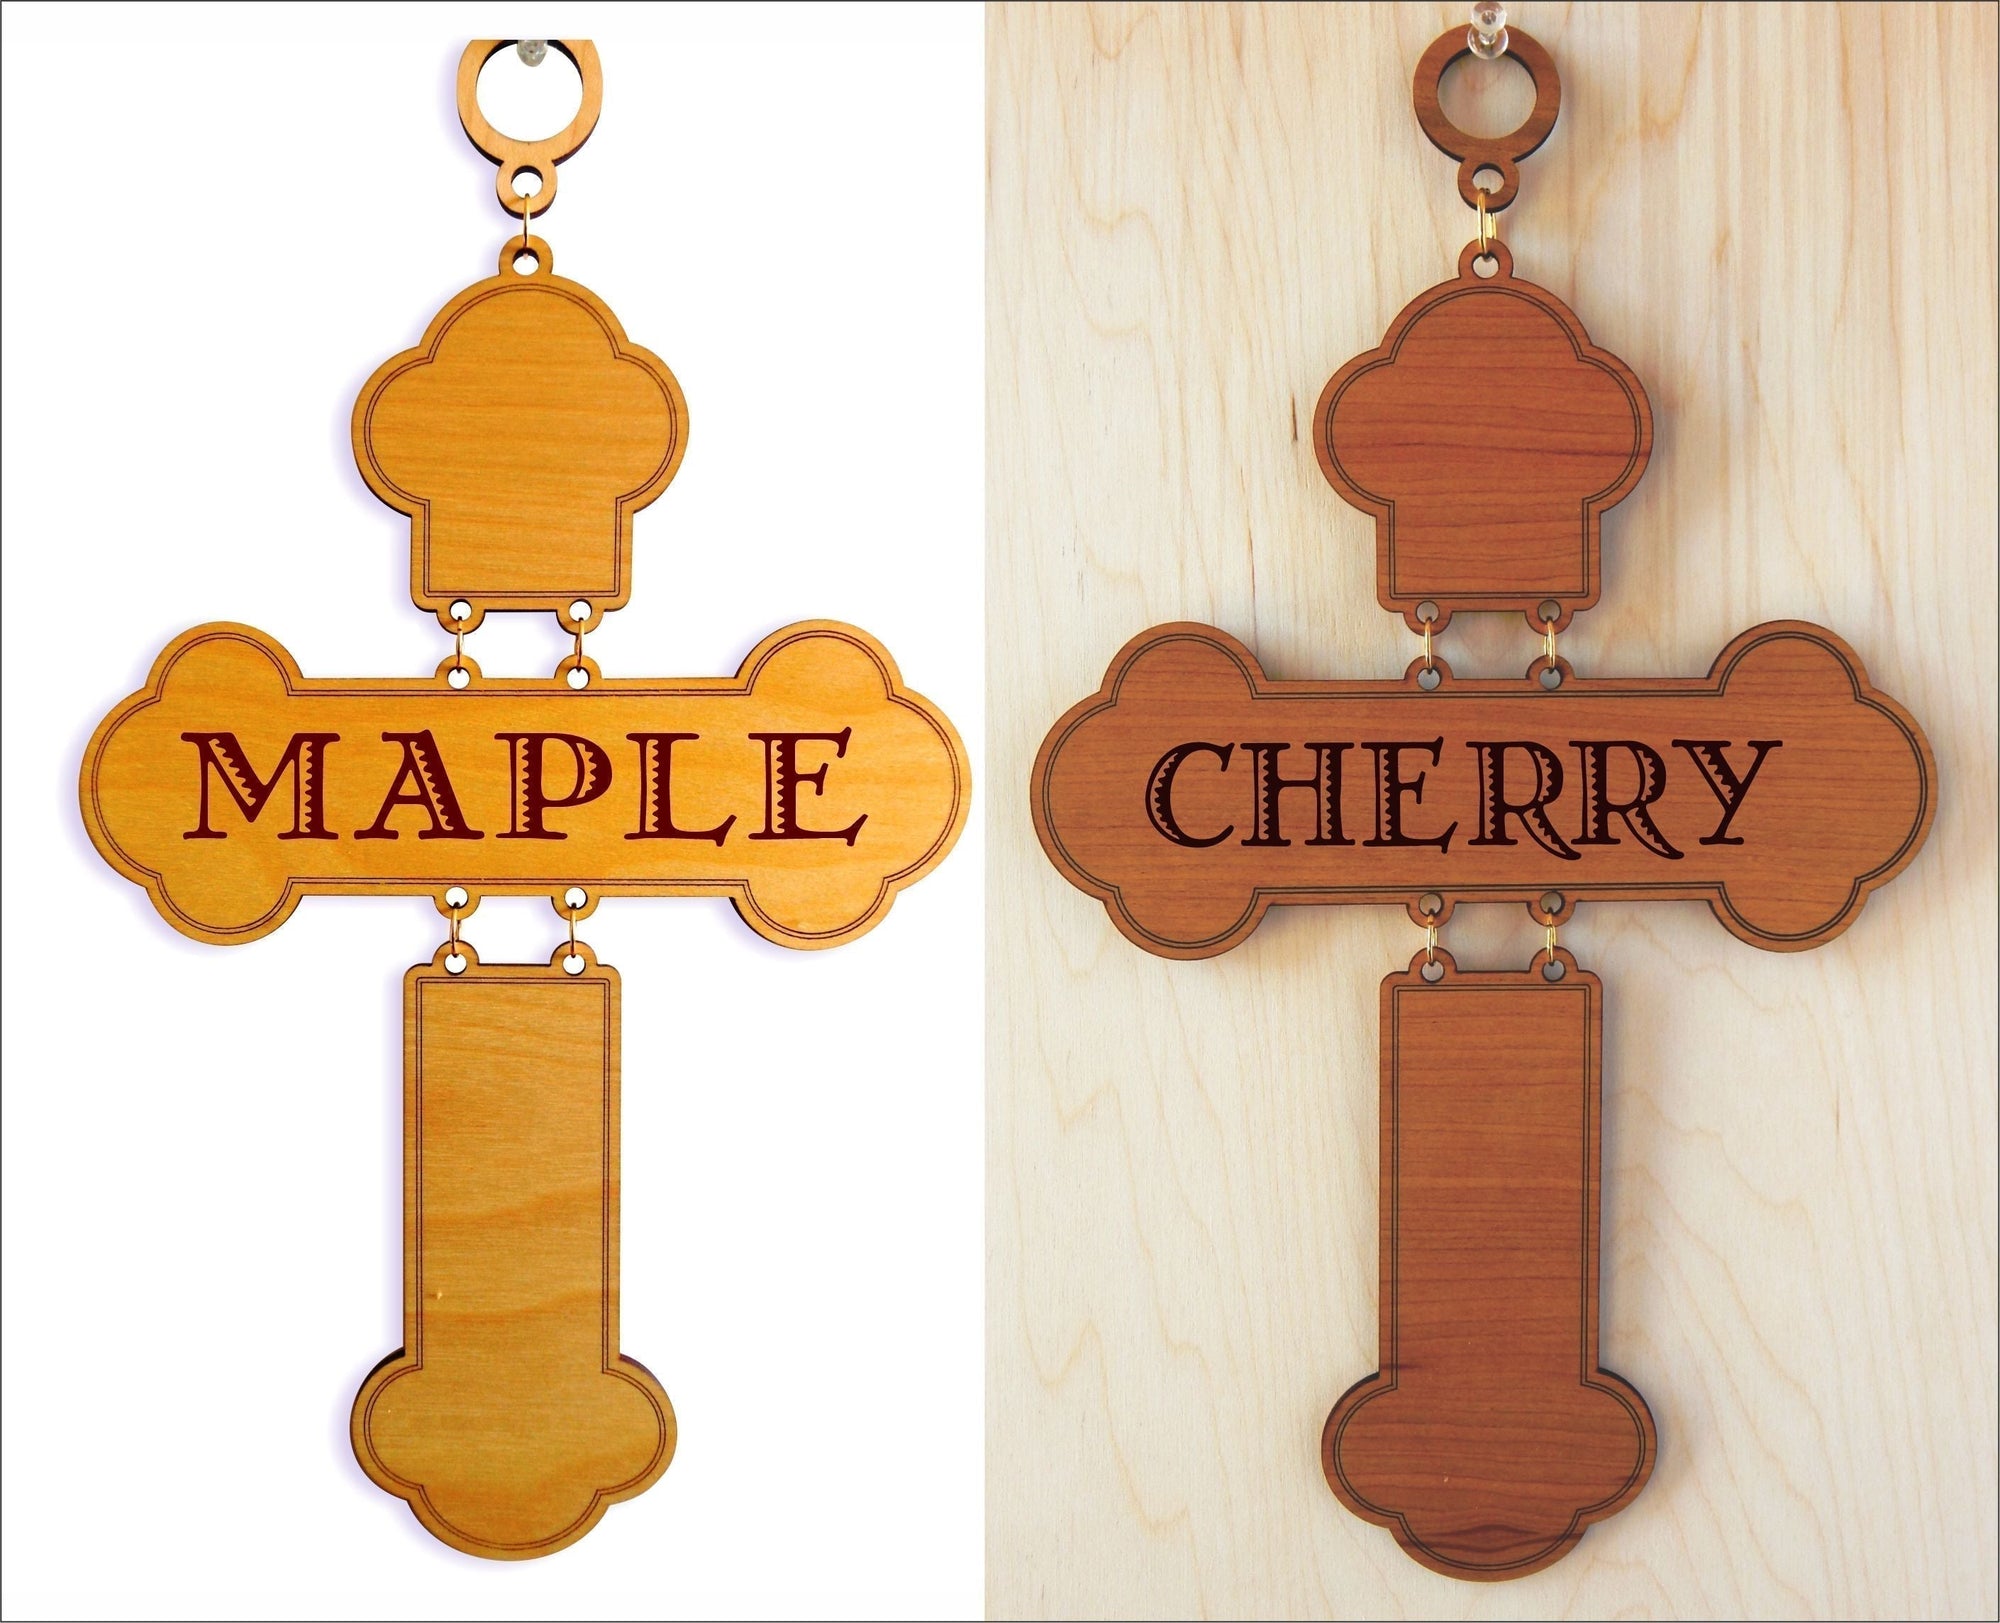 Personalized Gift for Sister | Sister In Law Long Distance Gift Wood Wall Cross